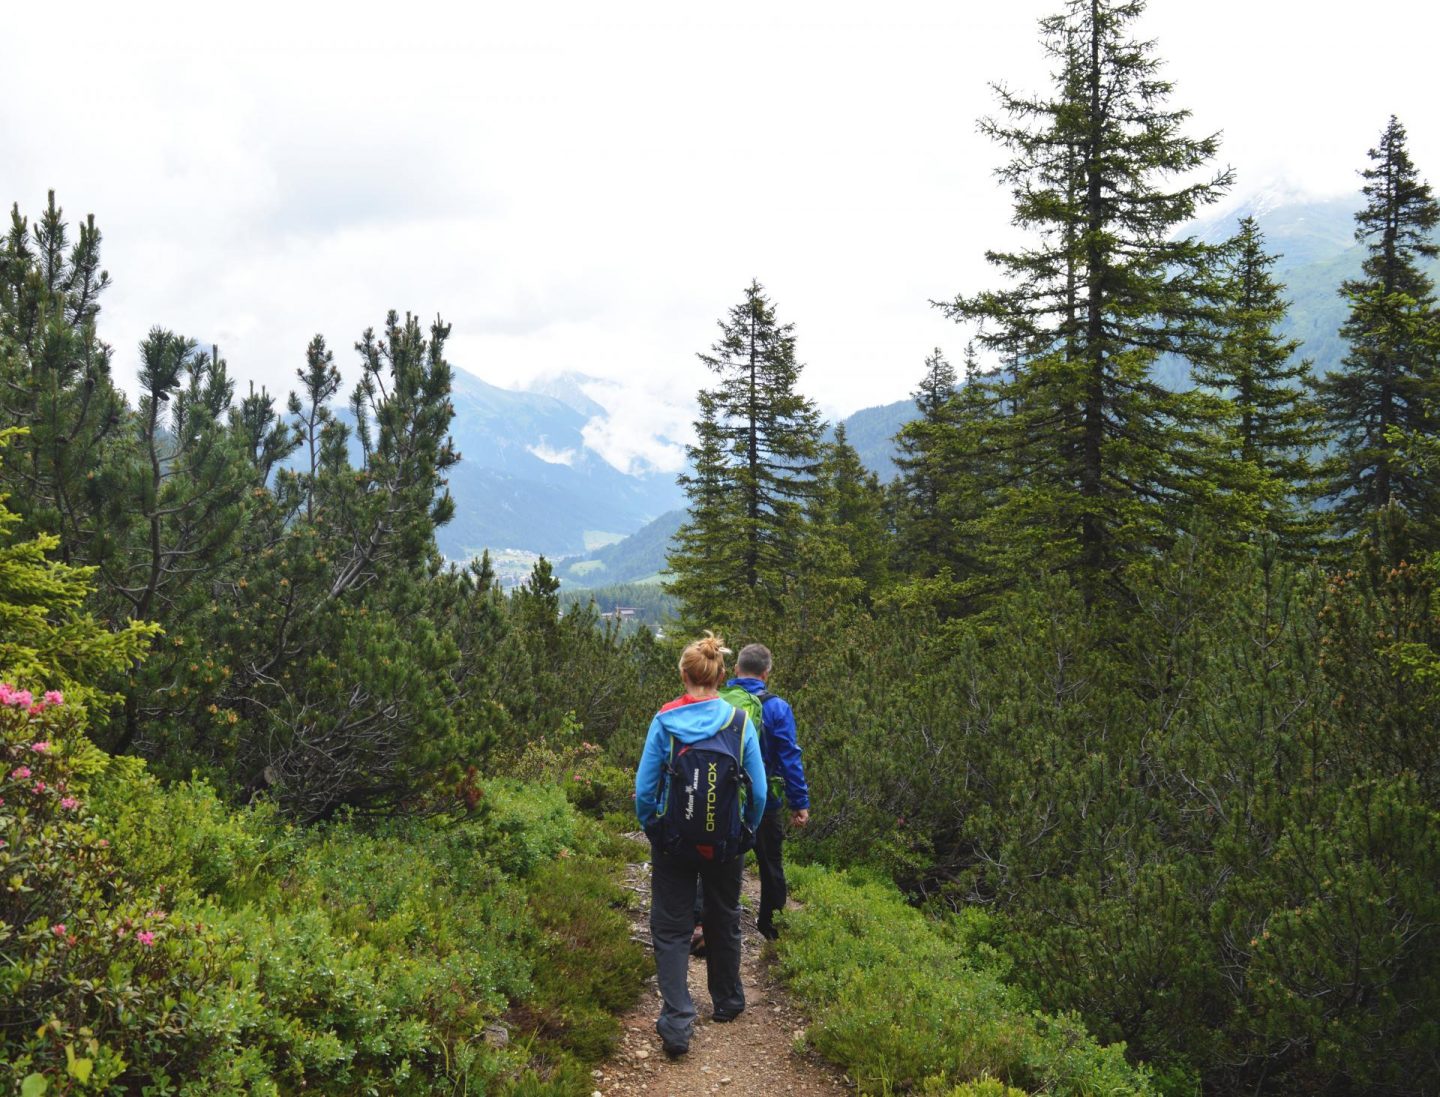 How Hiking Can Make You Happy | Walking For Mental & Physical Health